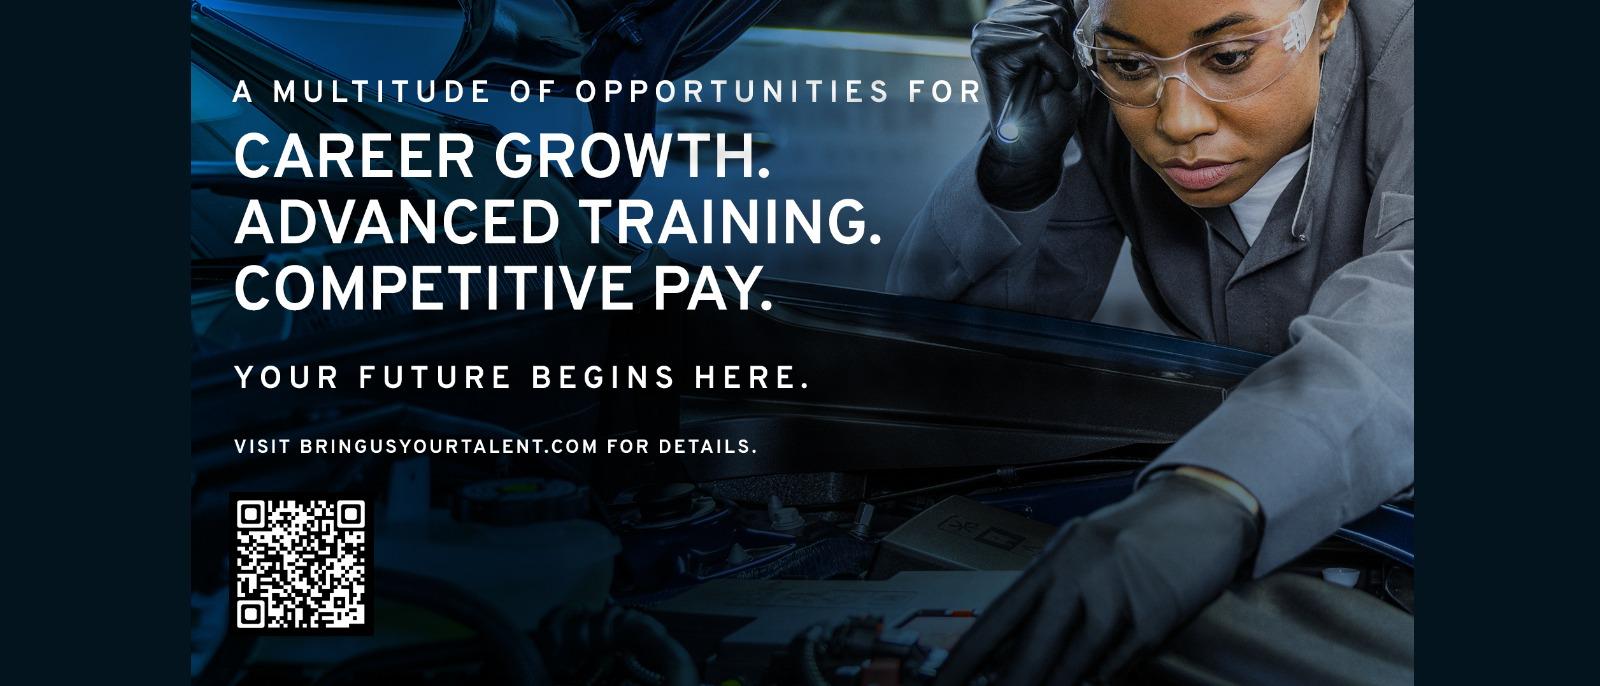 A Multitude of Opportunities for Career Growth. Advanced Training Competitive Pay. Your Future Begins Here.